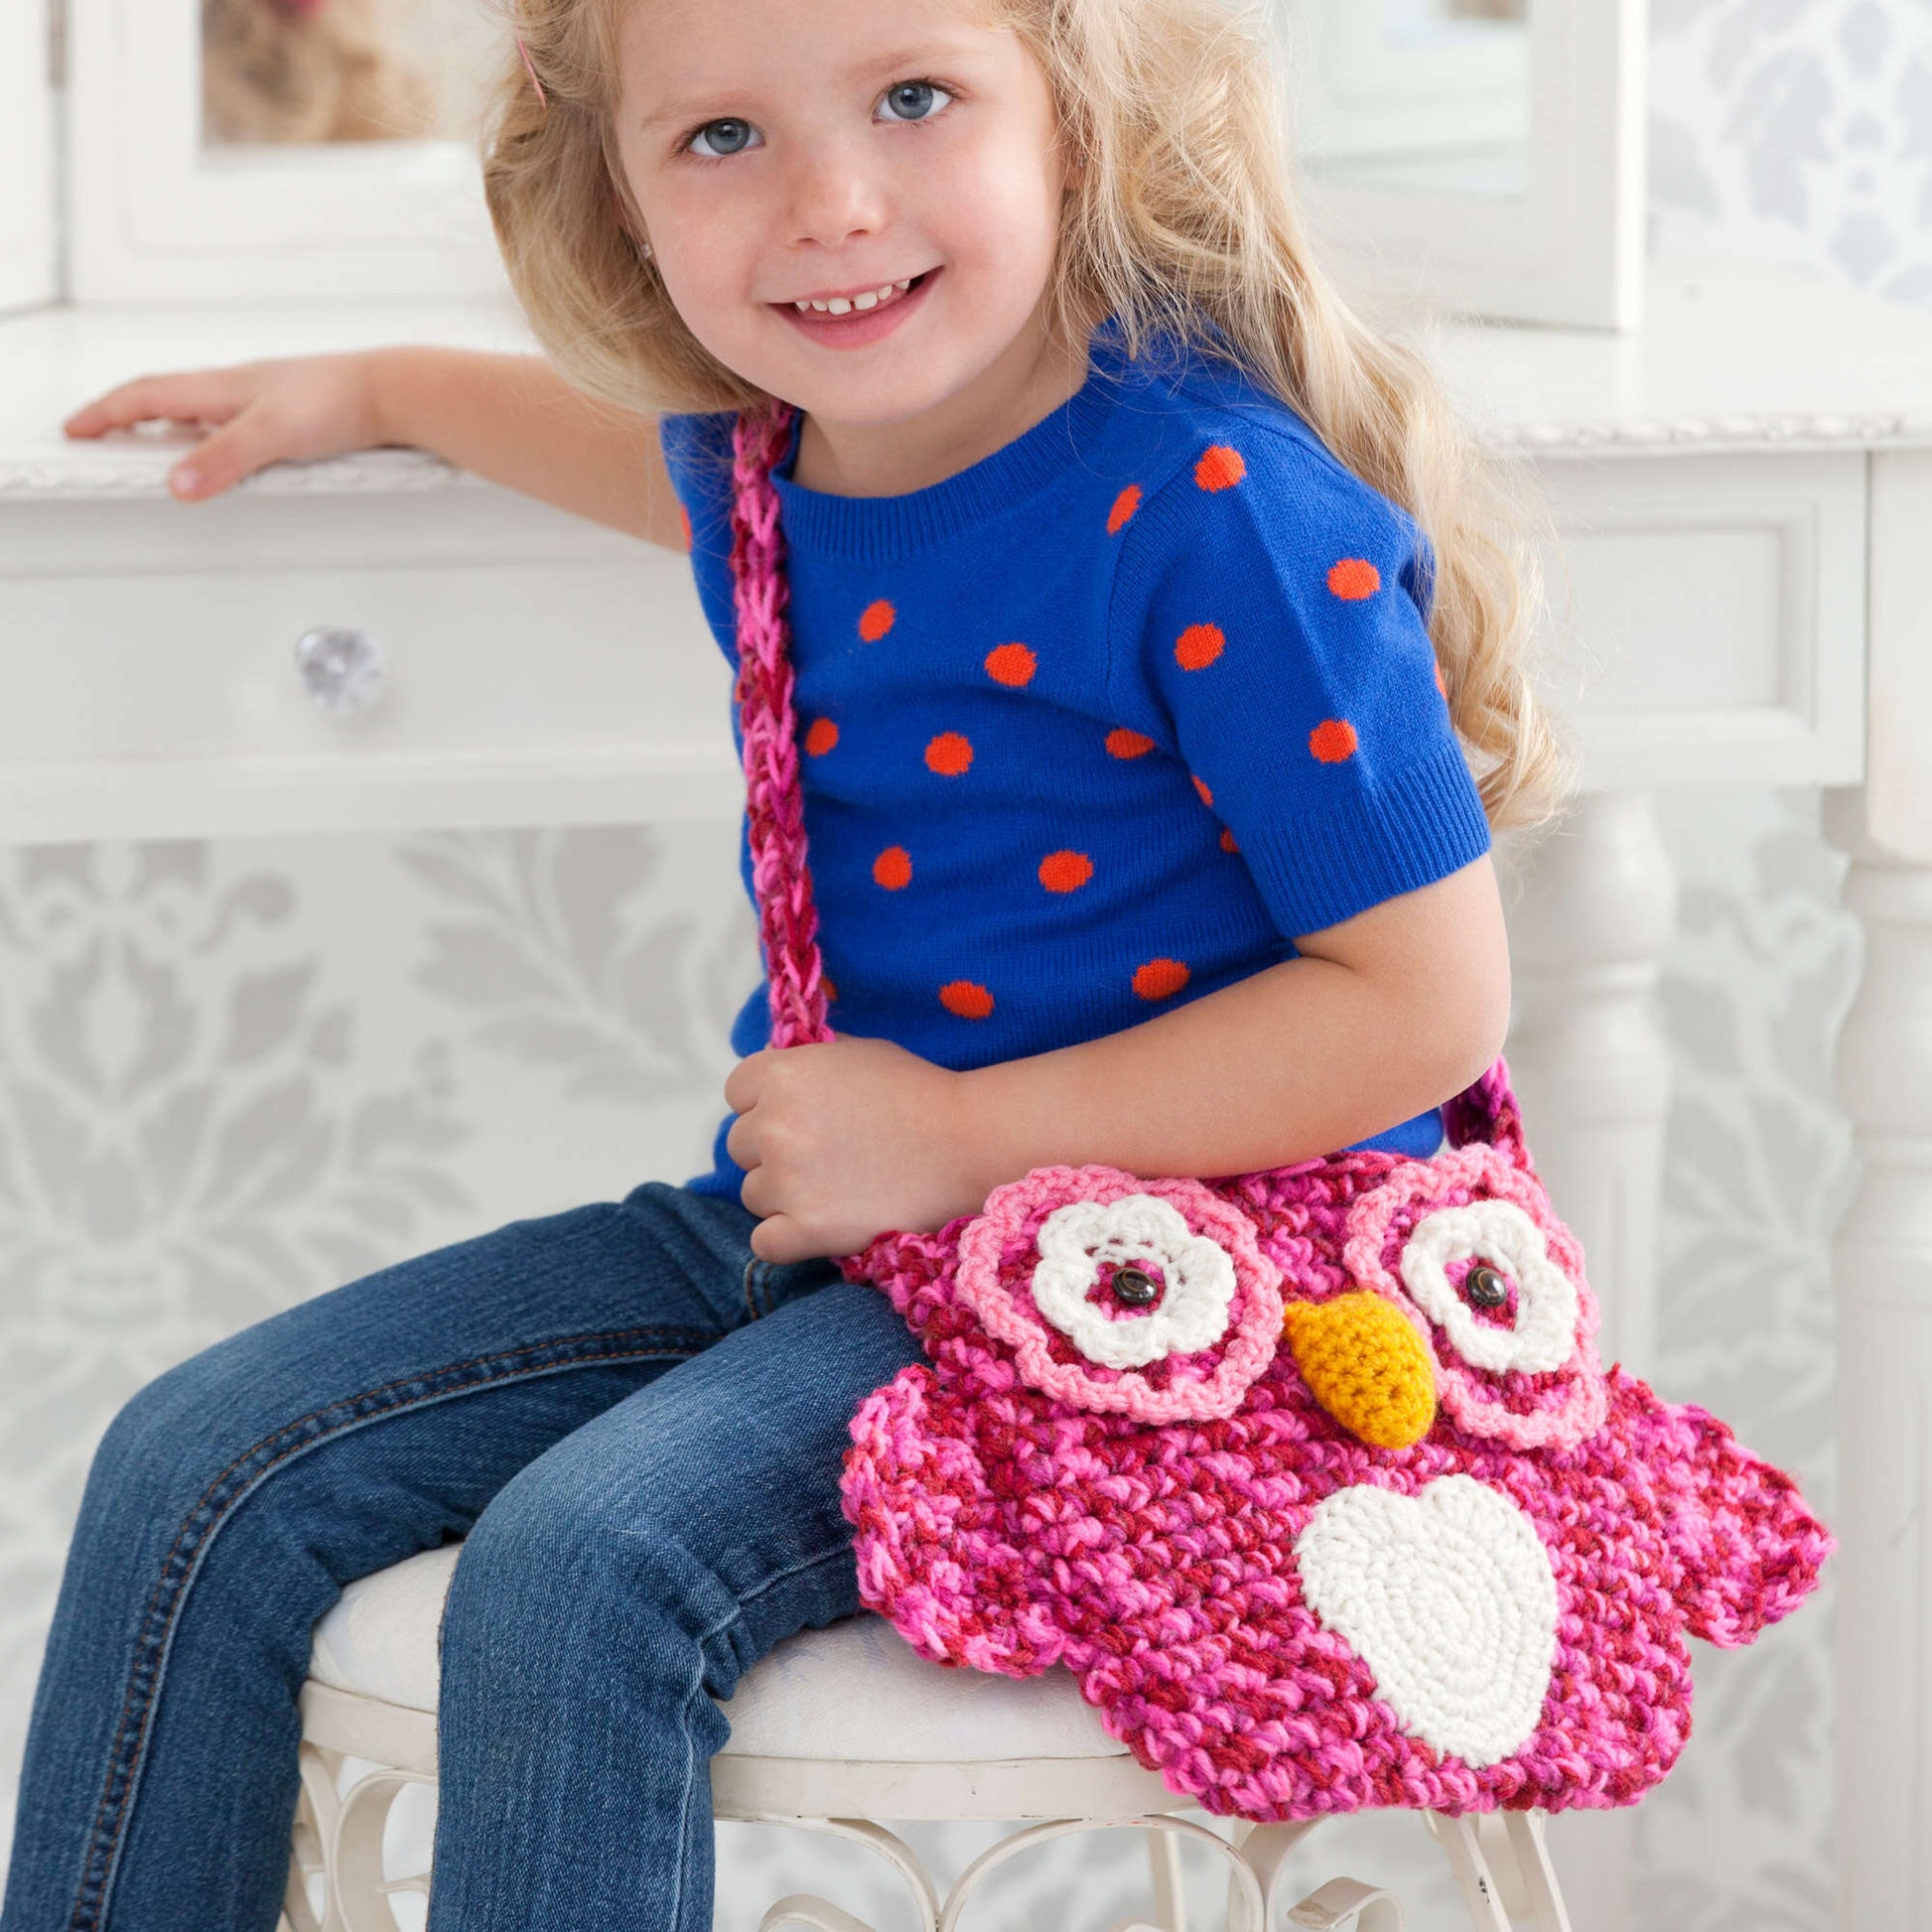 Free Red Heart Crochet Wise Owl Tote Bag Pattern